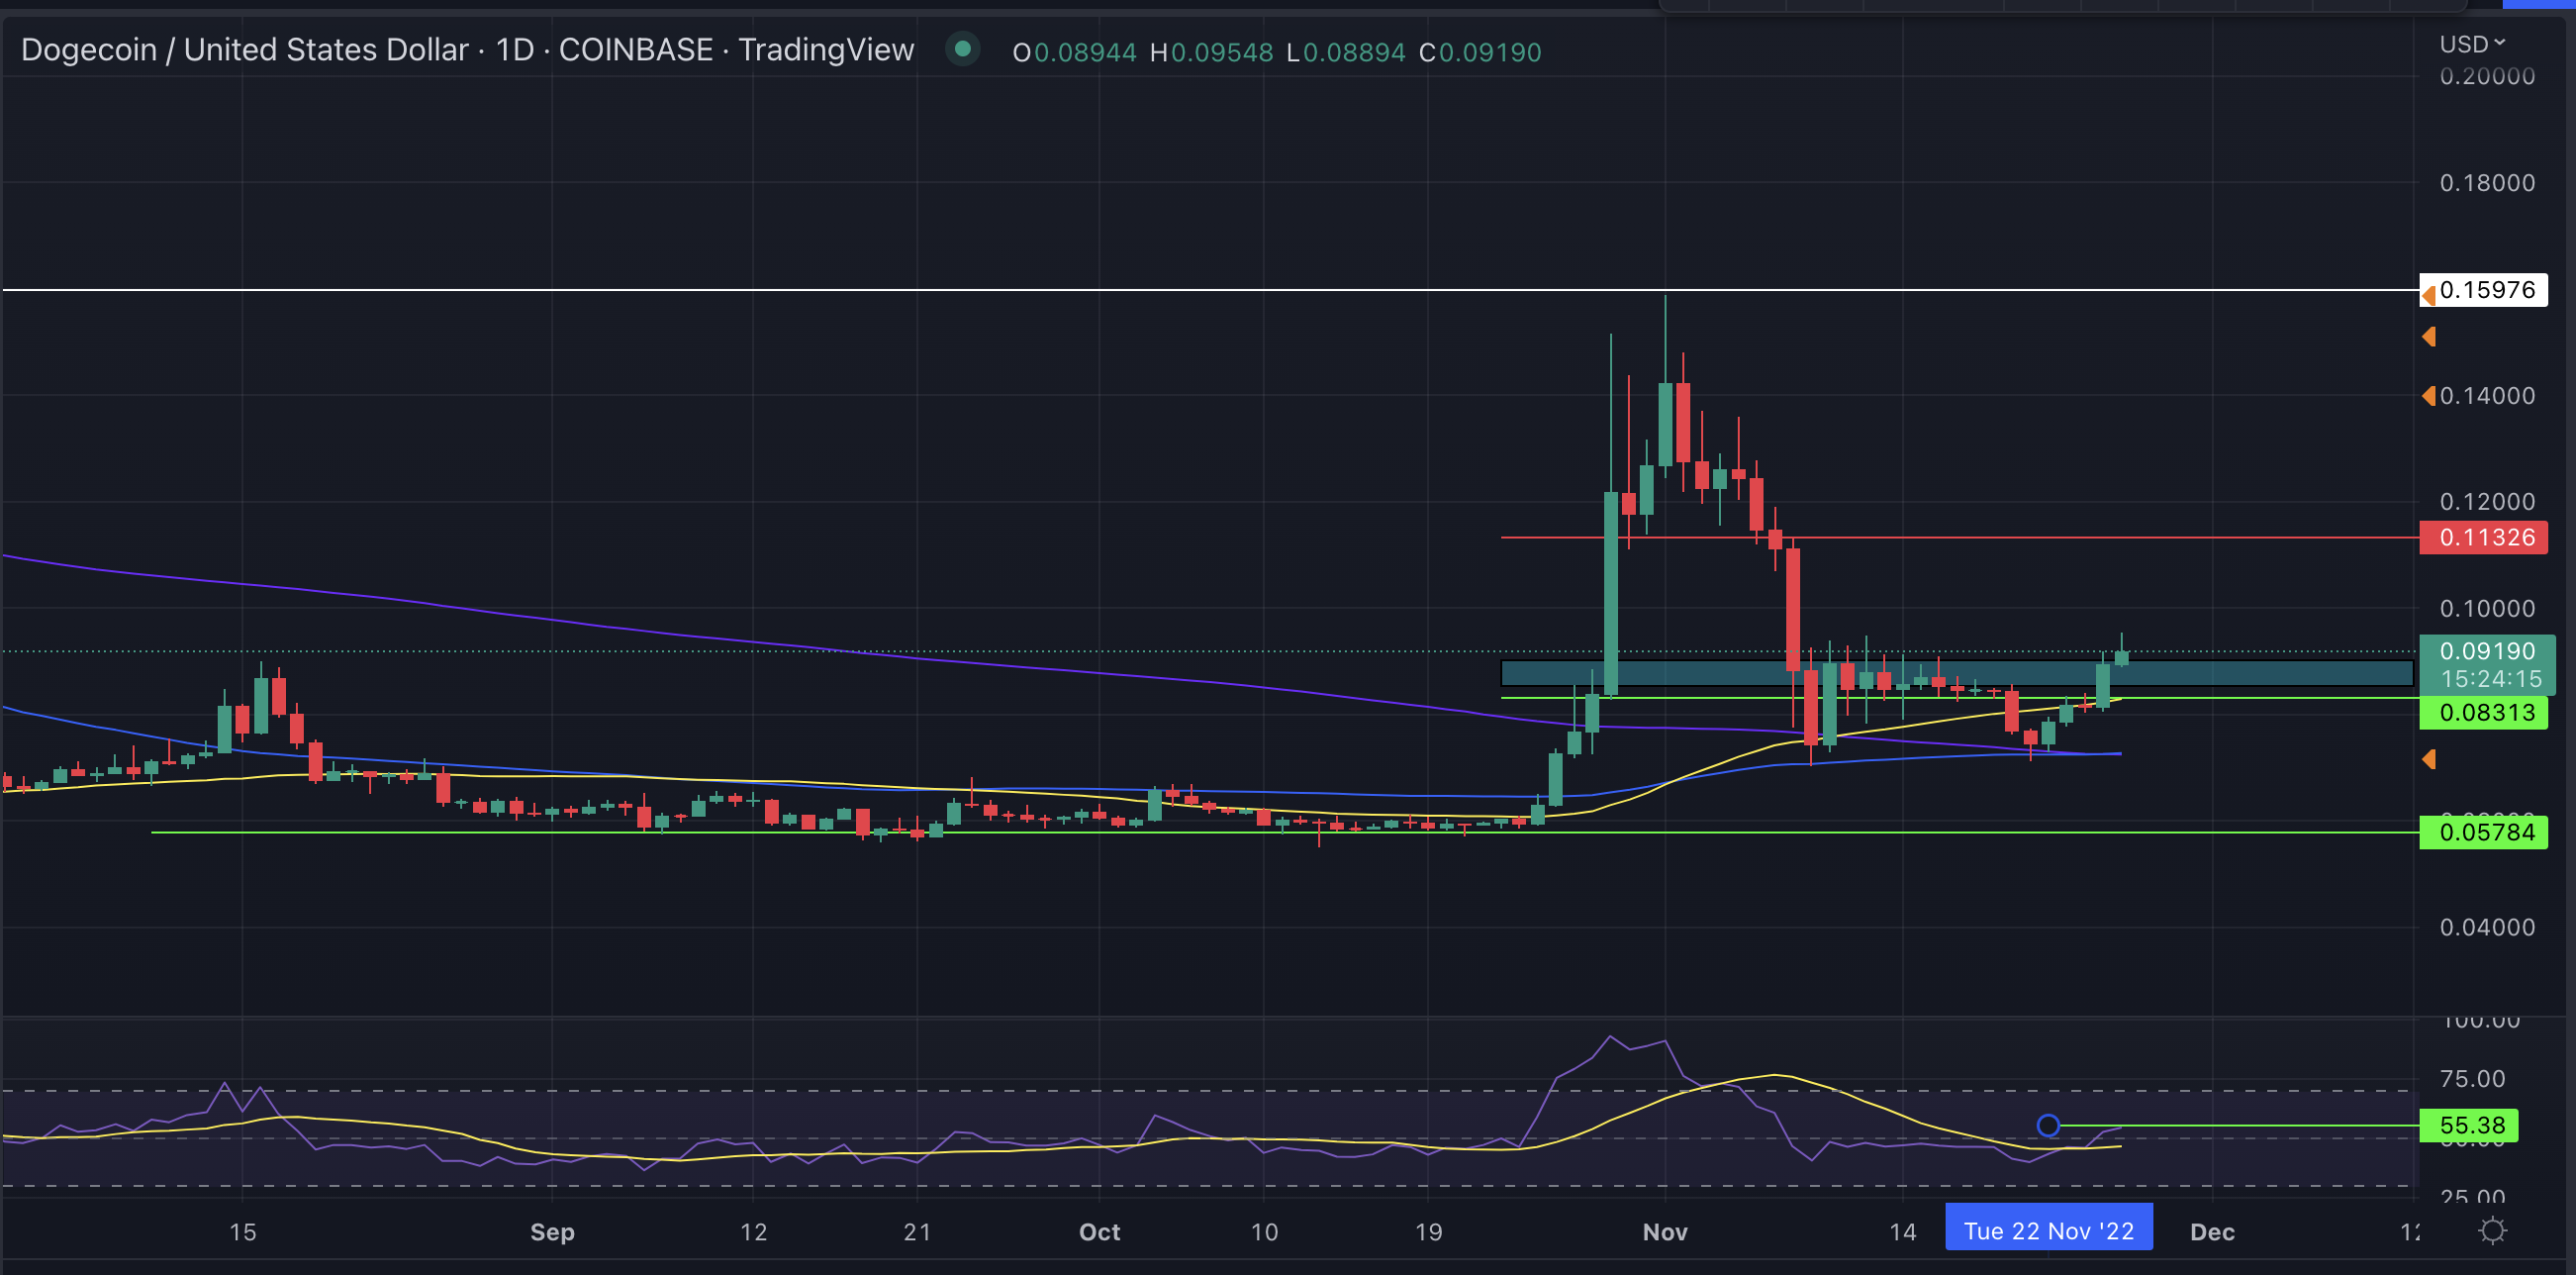 Dogecoin Price Daily Chart